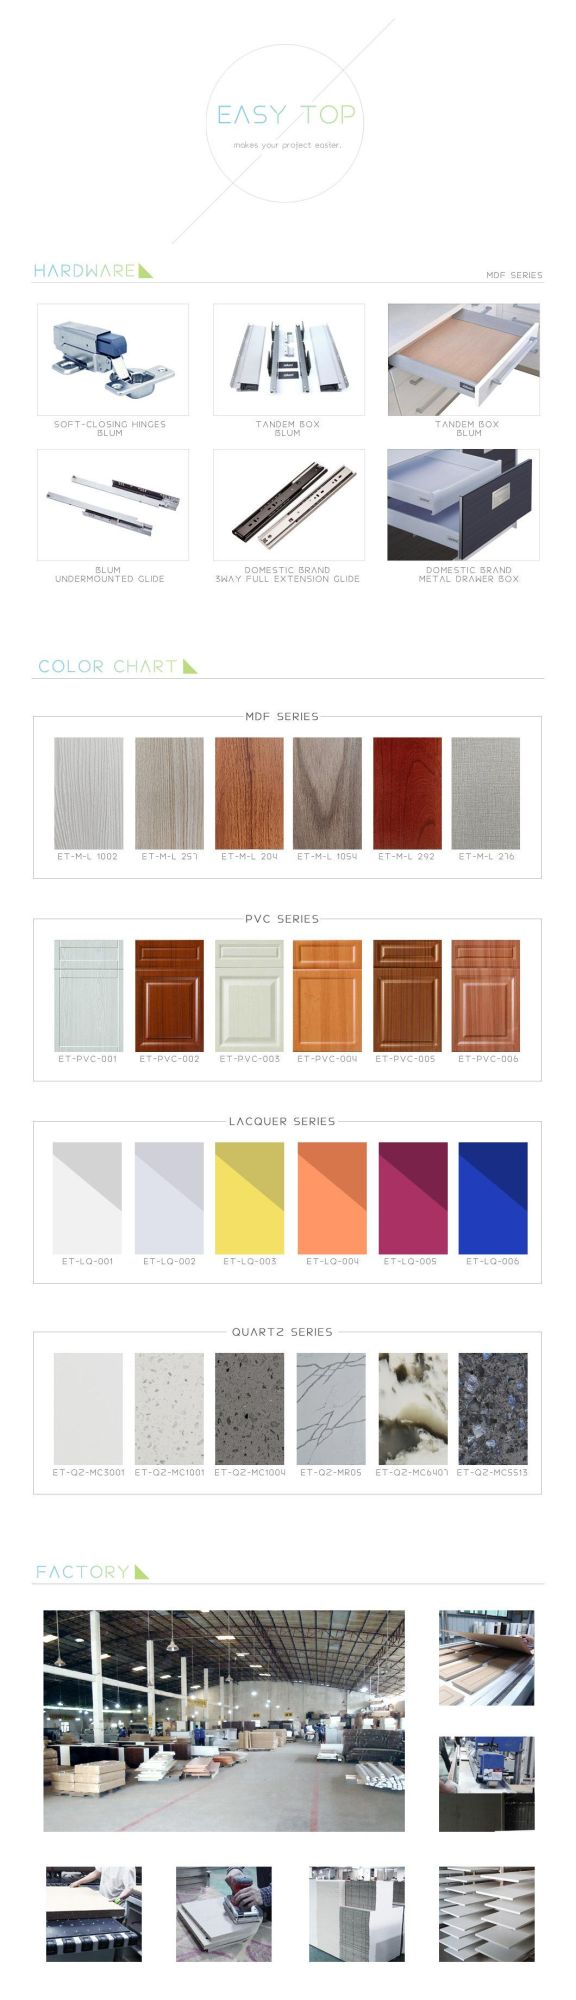 Matt White Doors and Drawer Fronts Joinery Oven Pantry Door Panel Cupboard Wall Storage Kitchen Fittings Cabinets